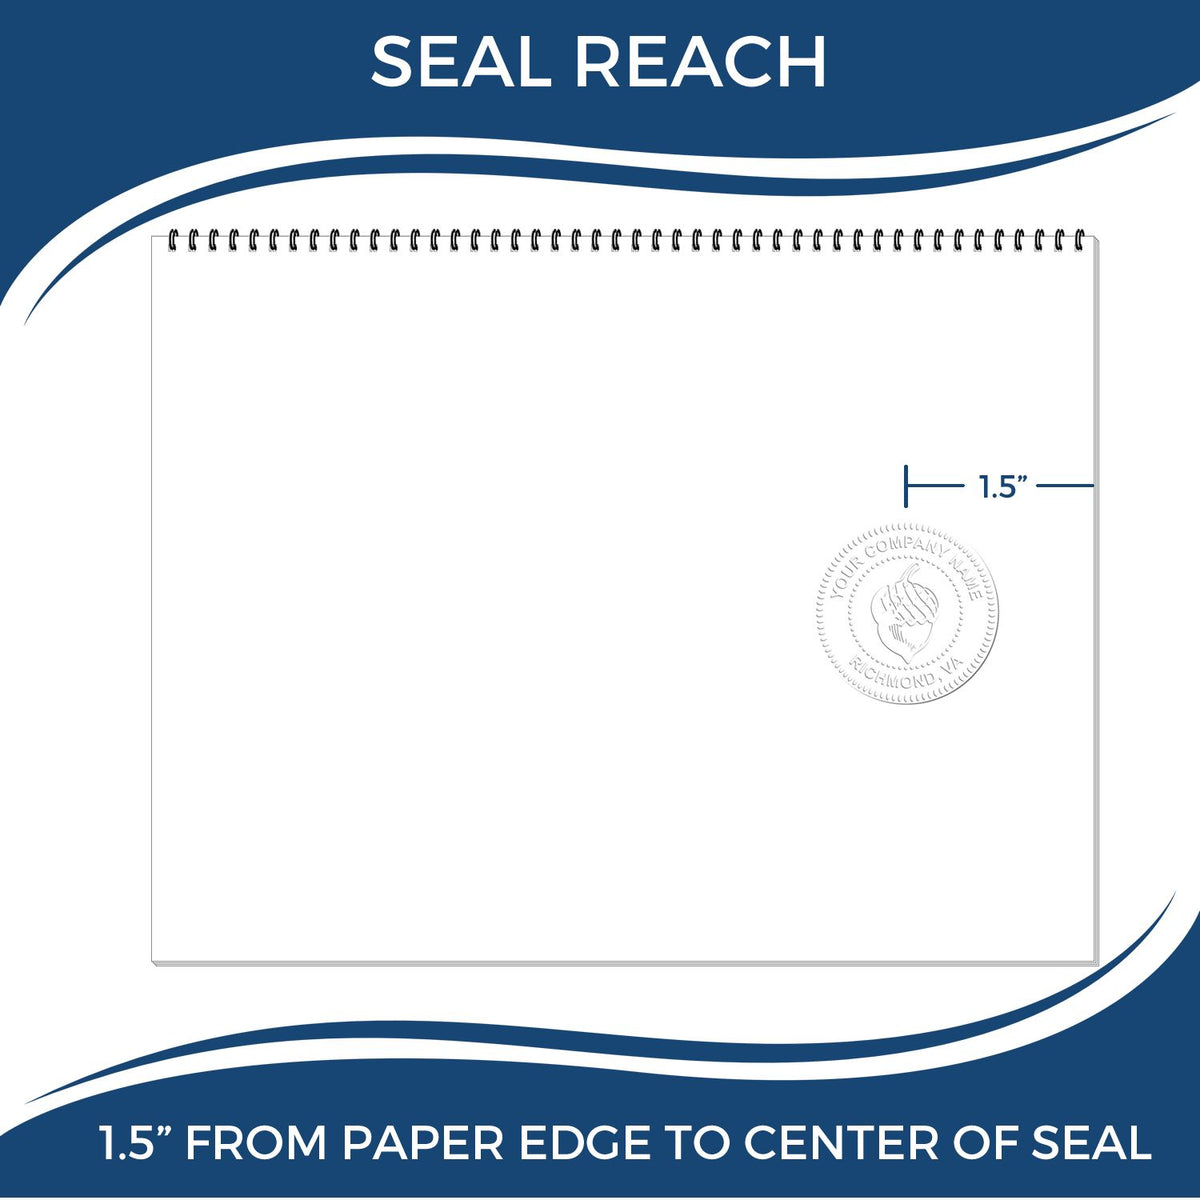 An infographic showing the seal reach which is represented by a ruler and a miniature seal image of the Gift Oregon Geologist Seal